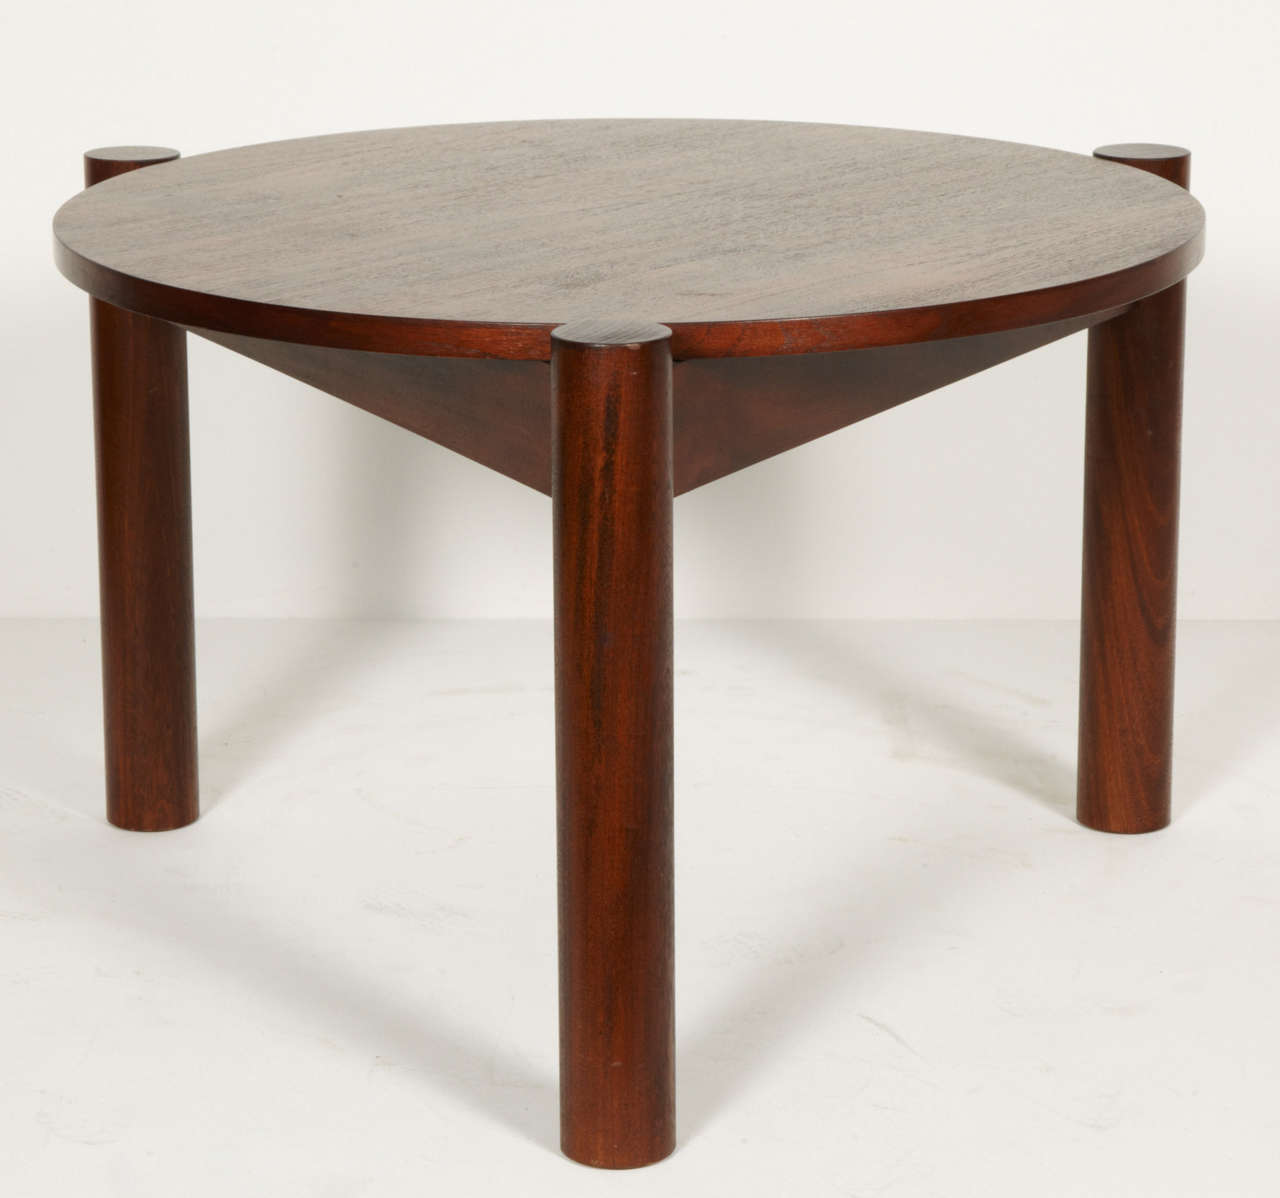 Three legs coffee table with a circular top made of teak.
H. 16 1/4 x D. 26 1/4 in.
Provenance : Special commission for the city of Chandigarh, India.